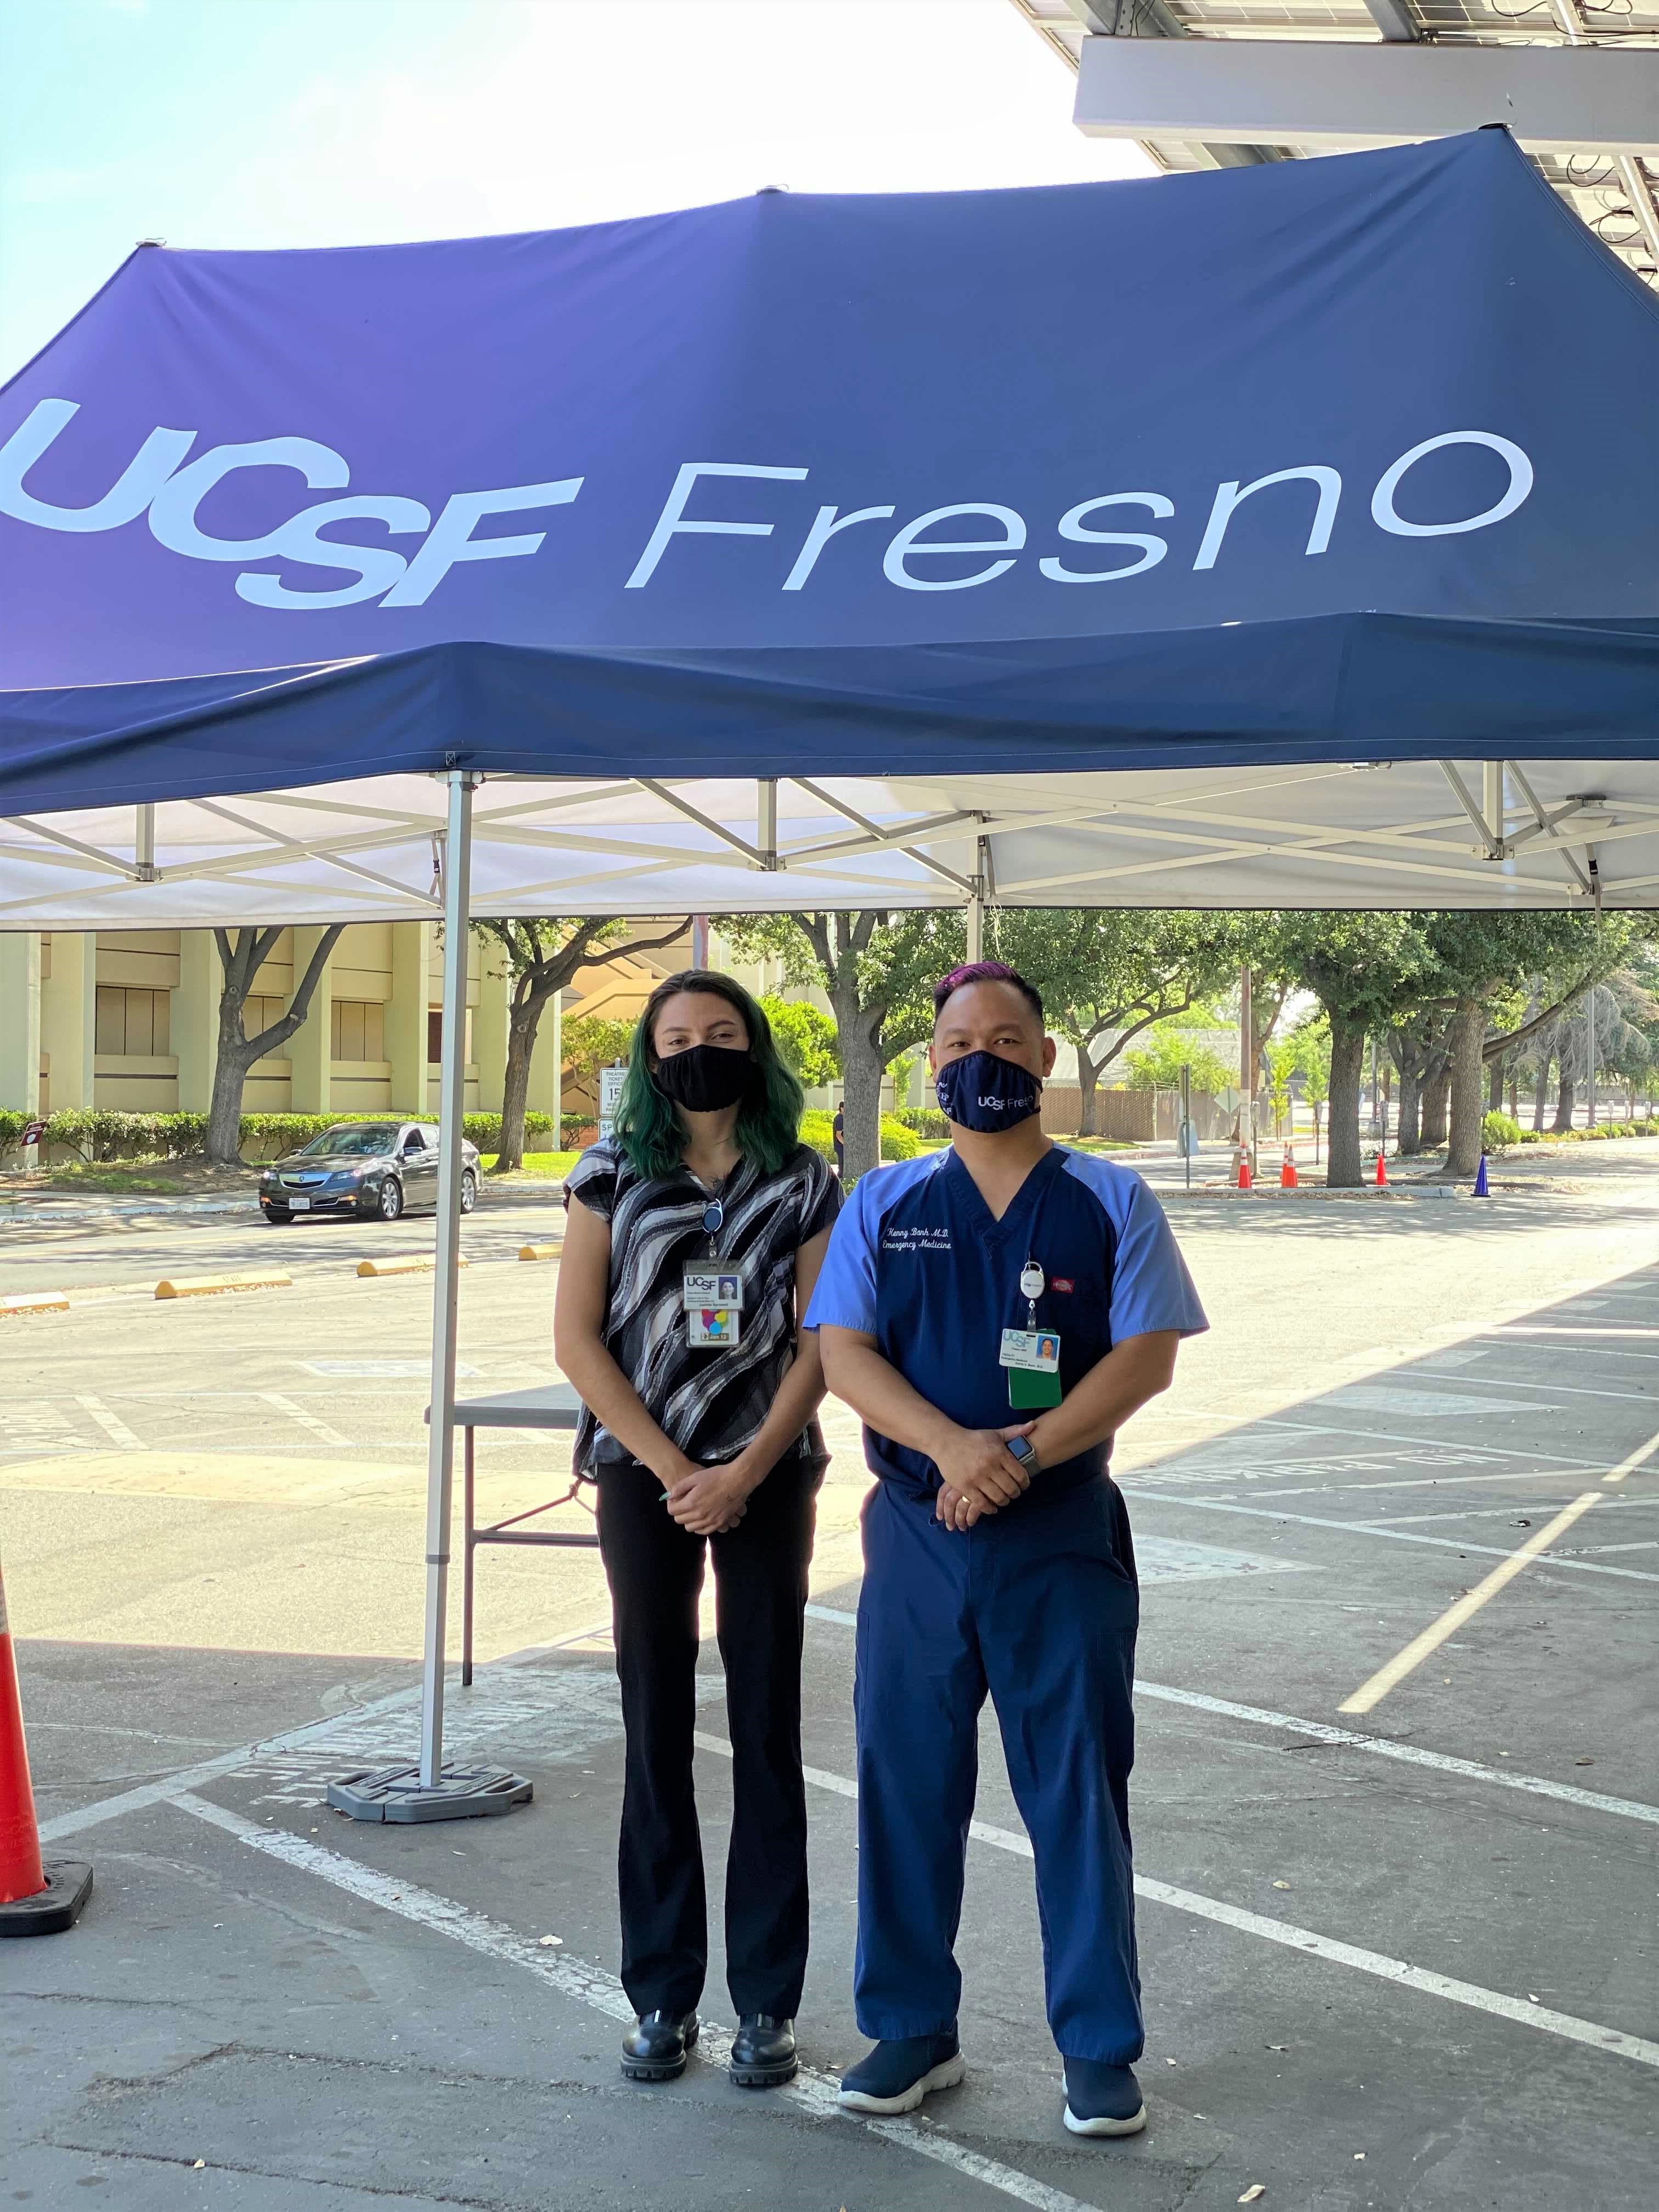 UCSF Fresno COVID-19 Equity Project team members at the Fresno City College vaccination site. From left to right: COVID-19 Equity Project Operations Specialist Juanita Sprowell and UCSF Fresno’s Associate Dean of Undergraduate Medical Education Dr. Kenny Banh, MD, FACEP